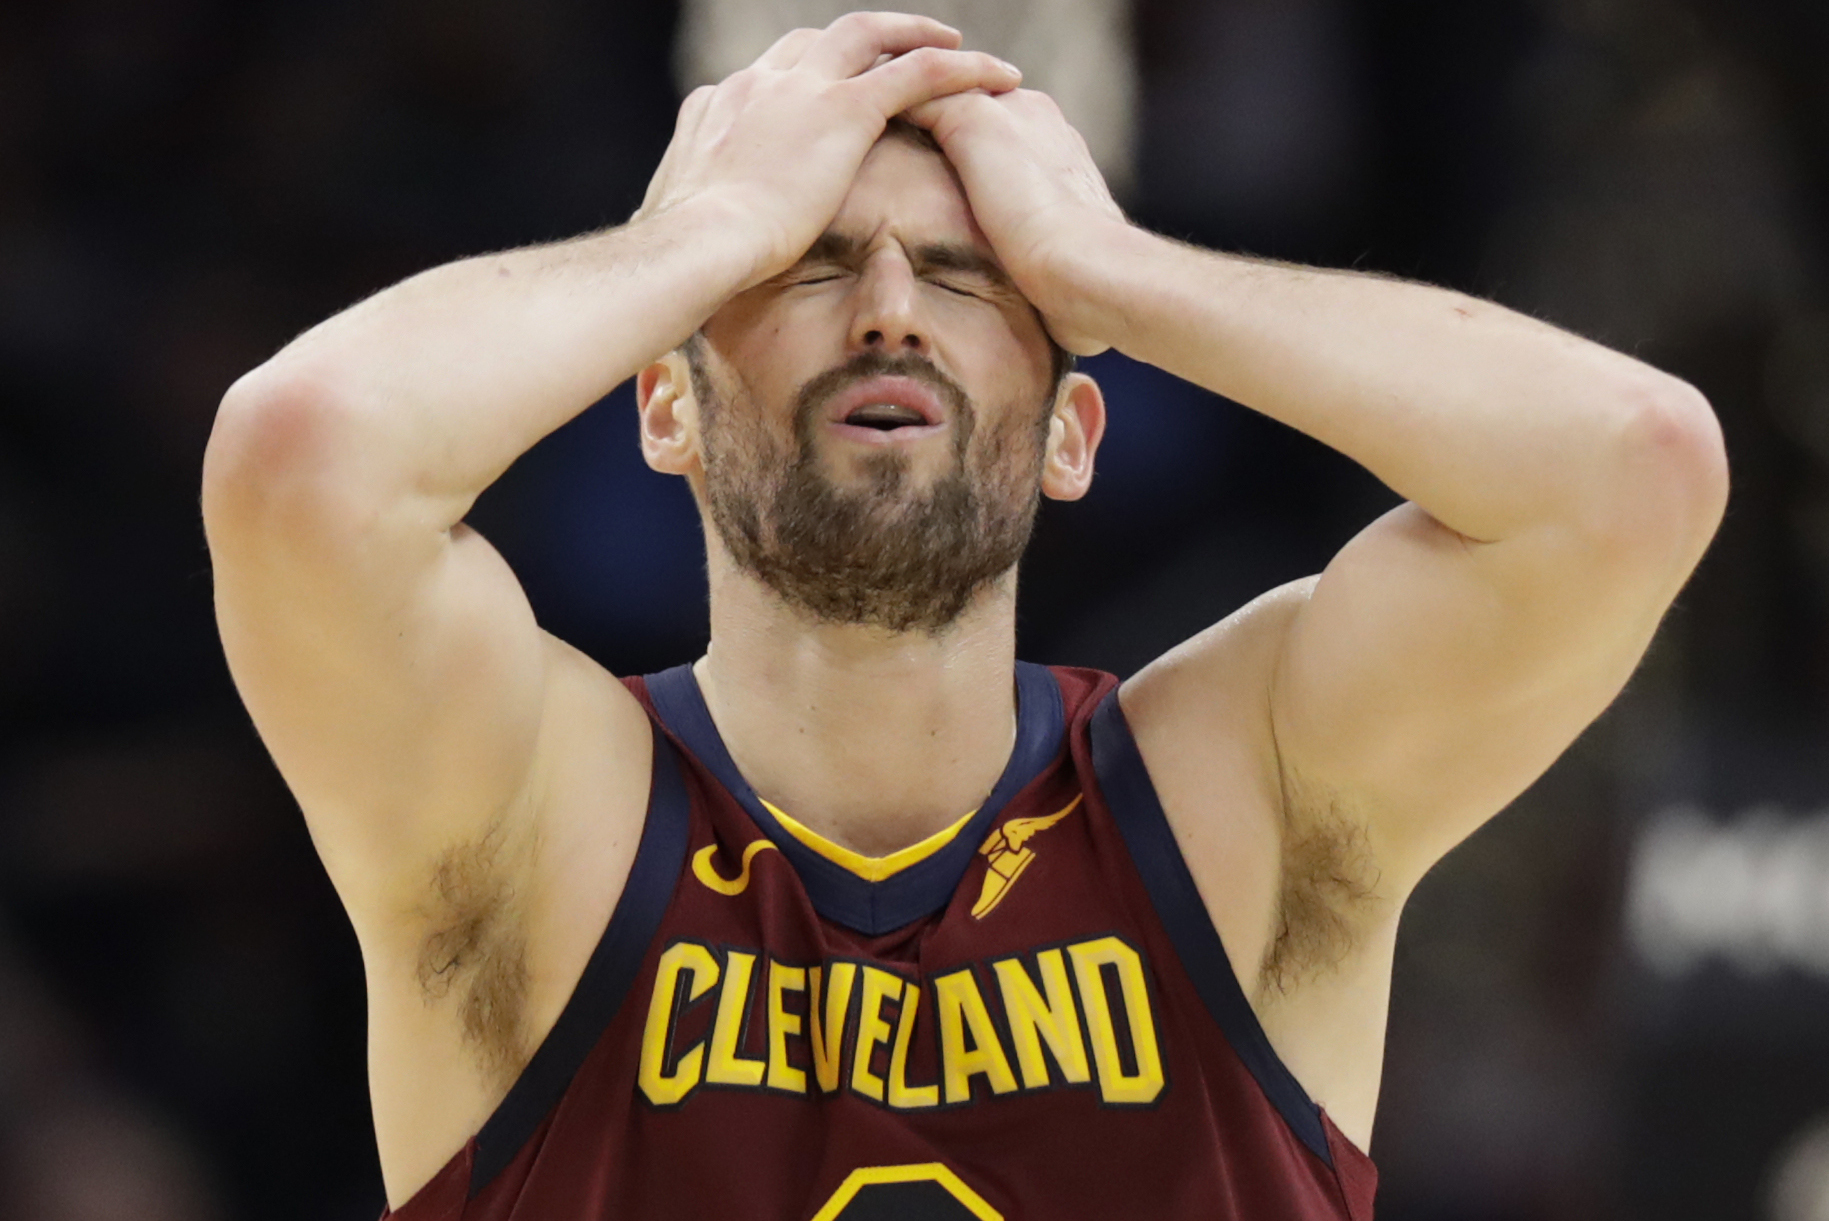 Kevin Love ERUPTS for 29 PTS & 8 3PM to help the Cavs defeat the